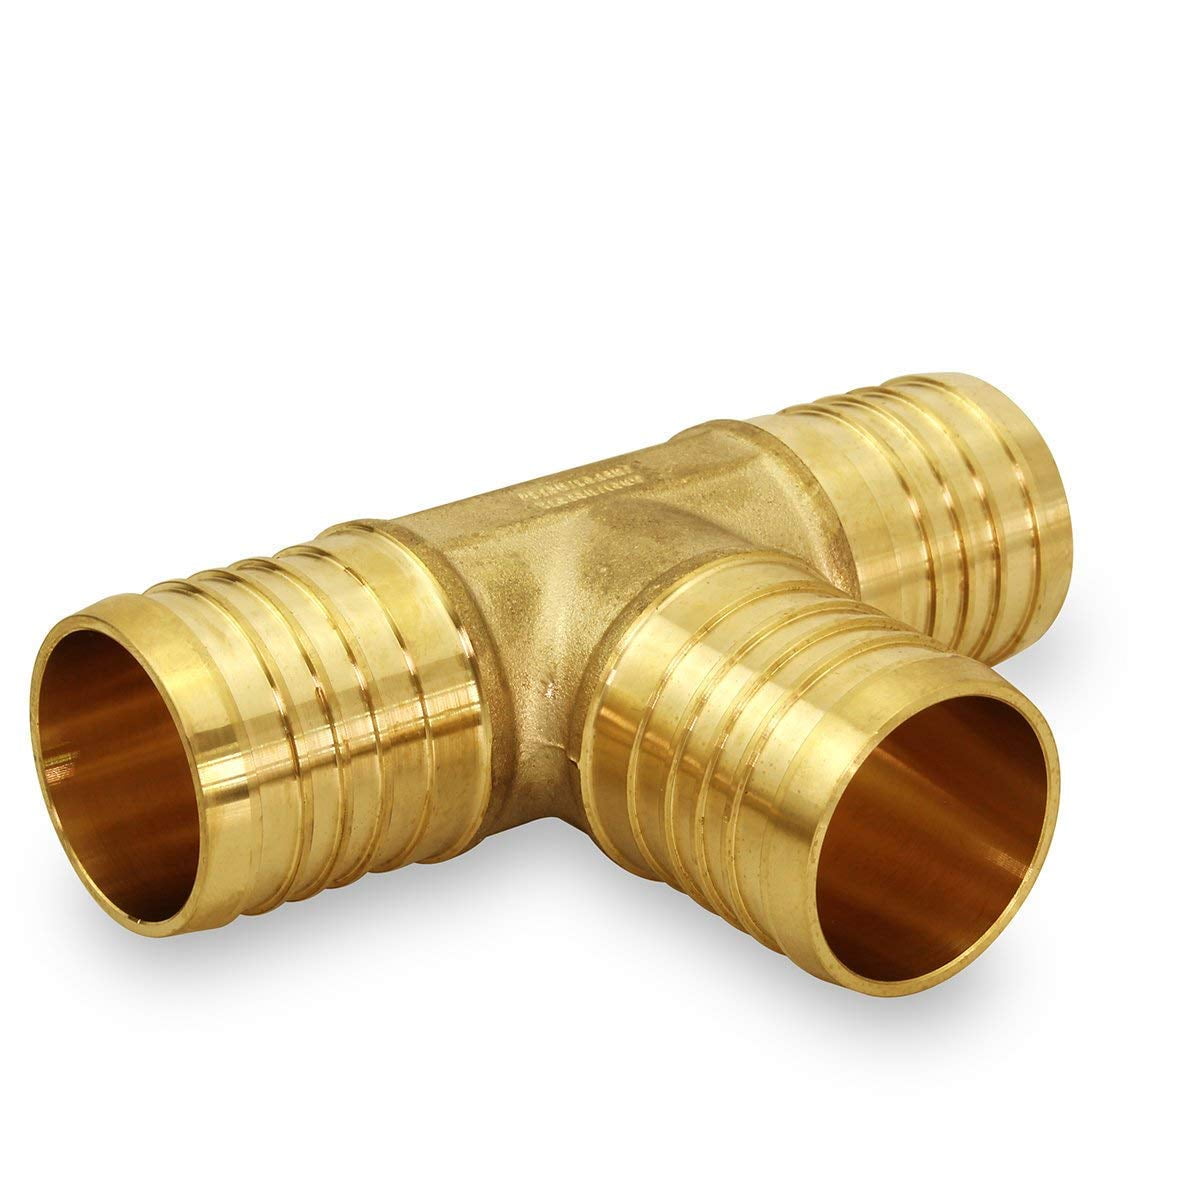 Everflow 2 Inch Two Female NPT Threaded Lead Free Brass Coupling Easy to Use 